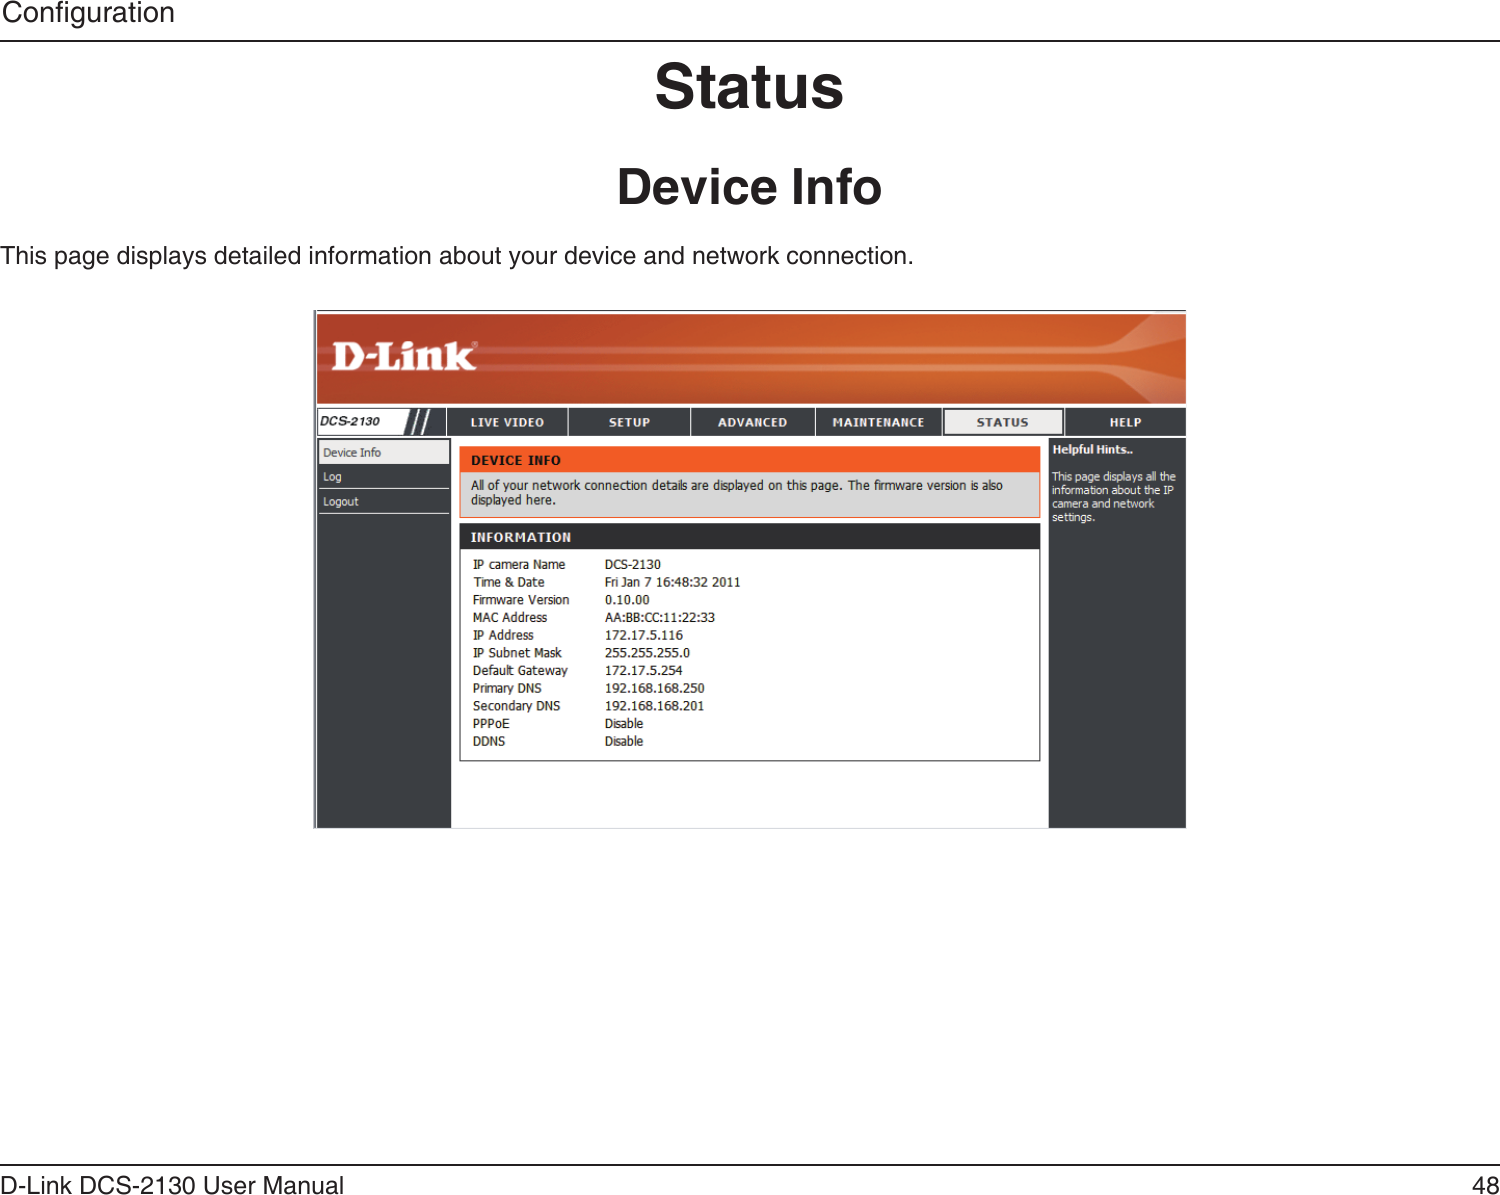 48D-Link DCS-2130 User ManualCongurationStatusThis page displays detailed information about your device and network connection.Device Info